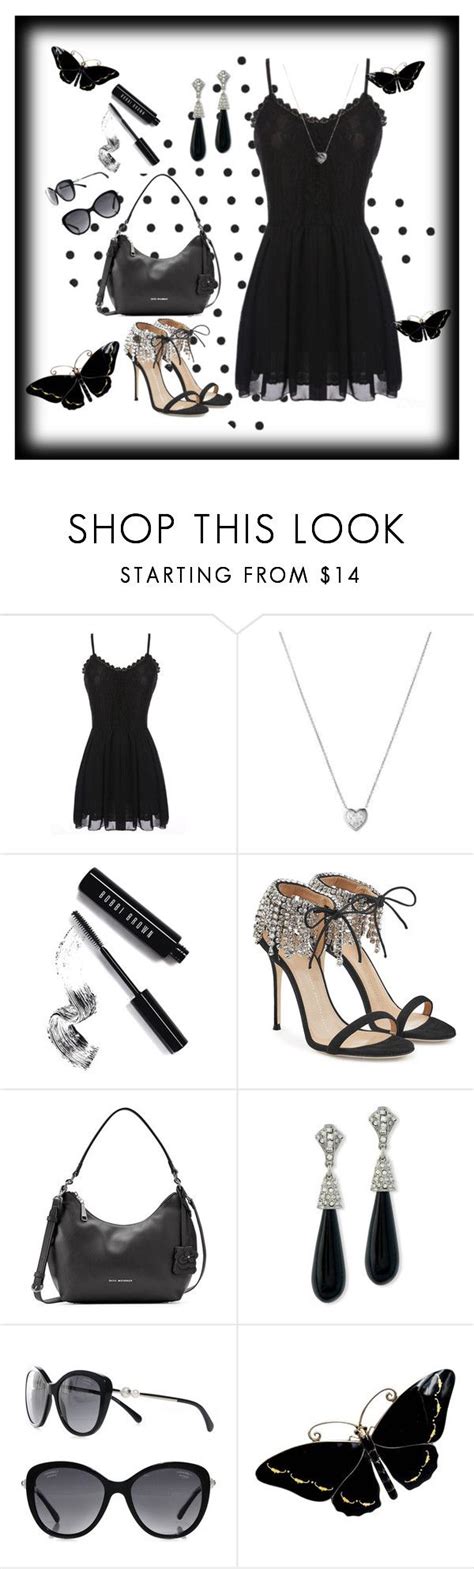 Back To Black By M Aviles Ma Liked On Polyvore Featuring Links Of